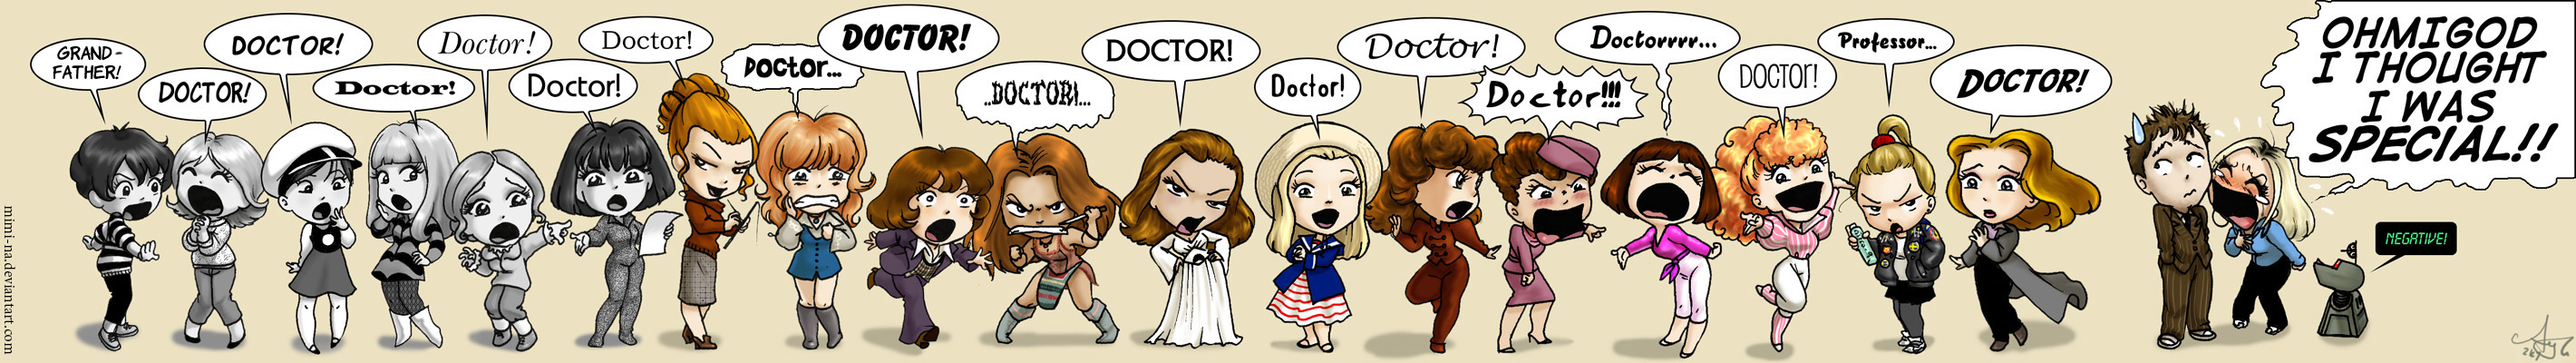 doctor who s13